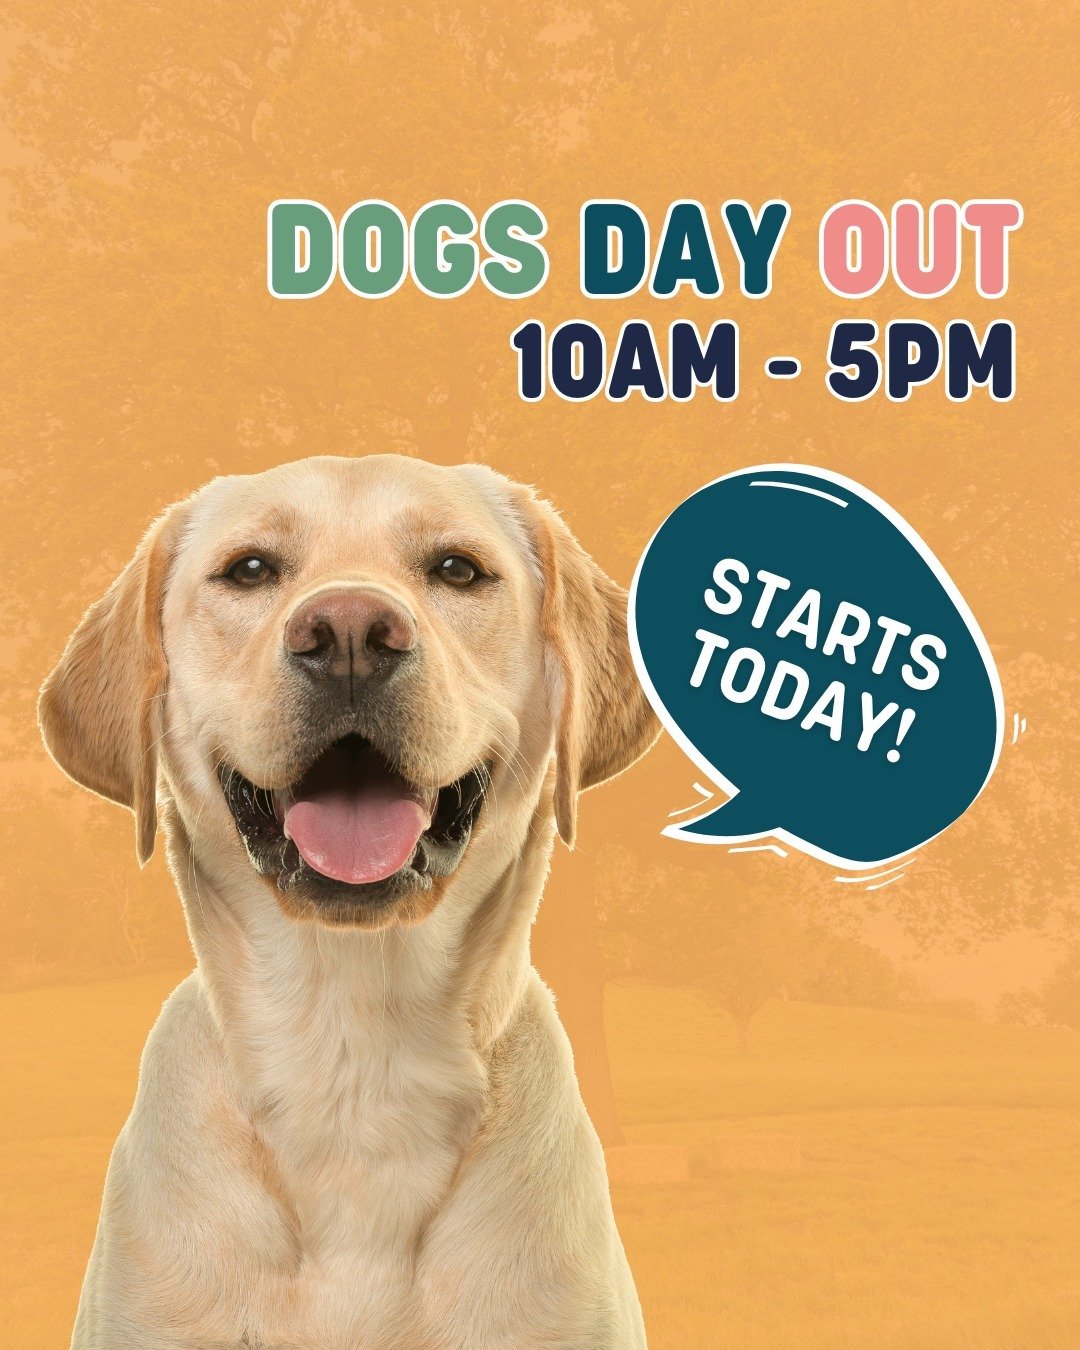 Today's the day! 🐶We can't wait to see you all in East Worldham🥳

A few important reminders...

🐶 D�ogs must be on a lead at all times, unless in the designated off-lead area. No extendable leads! 

🎟Please make sure you have your ticket download